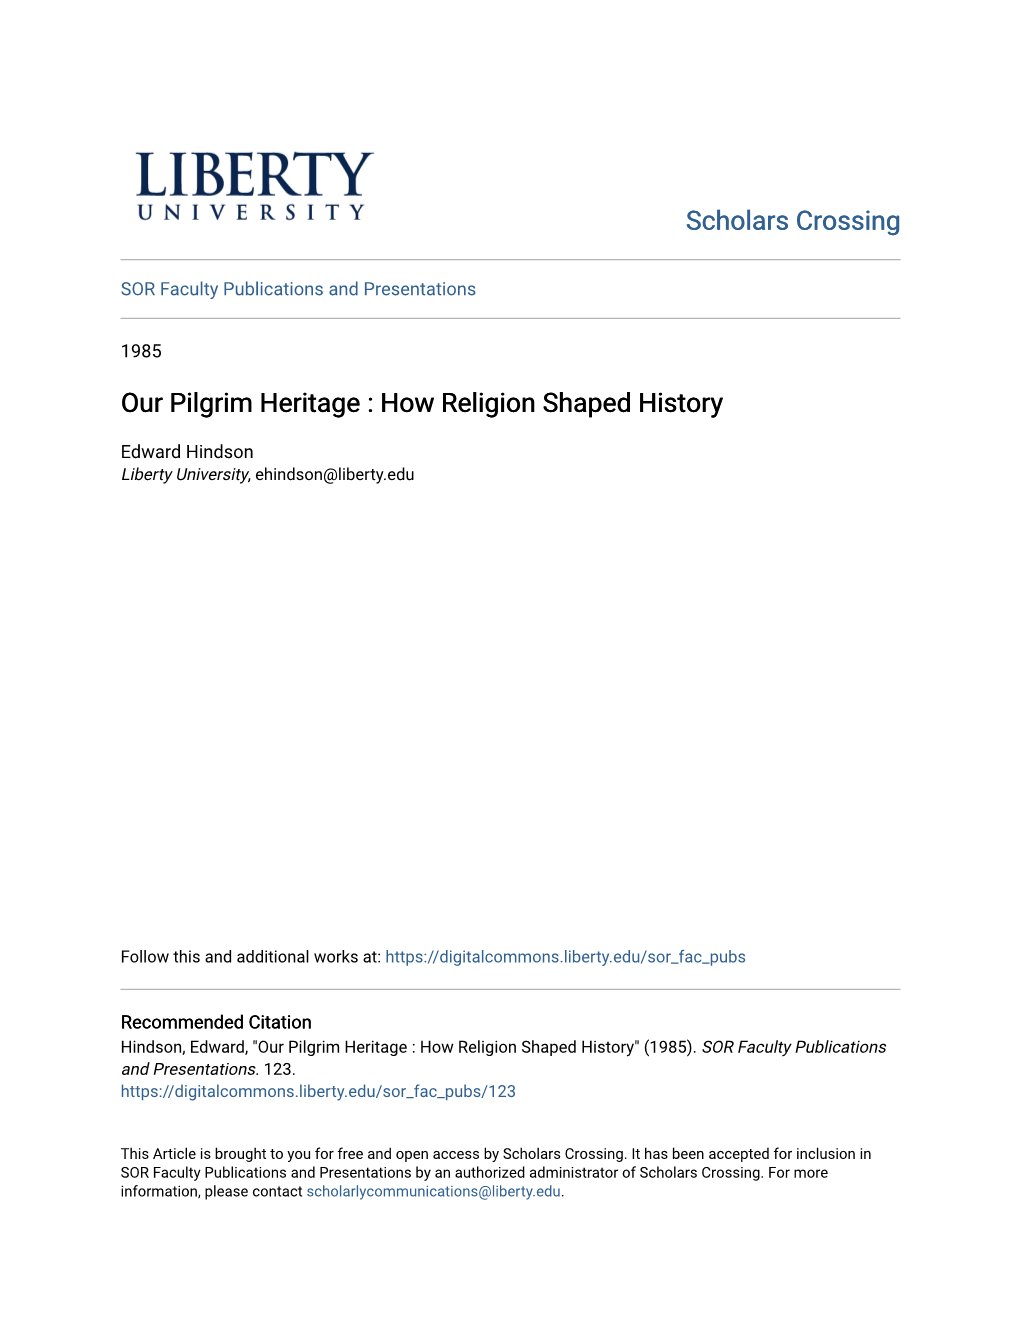 Our Pilgrim Heritage : How Religion Shaped History